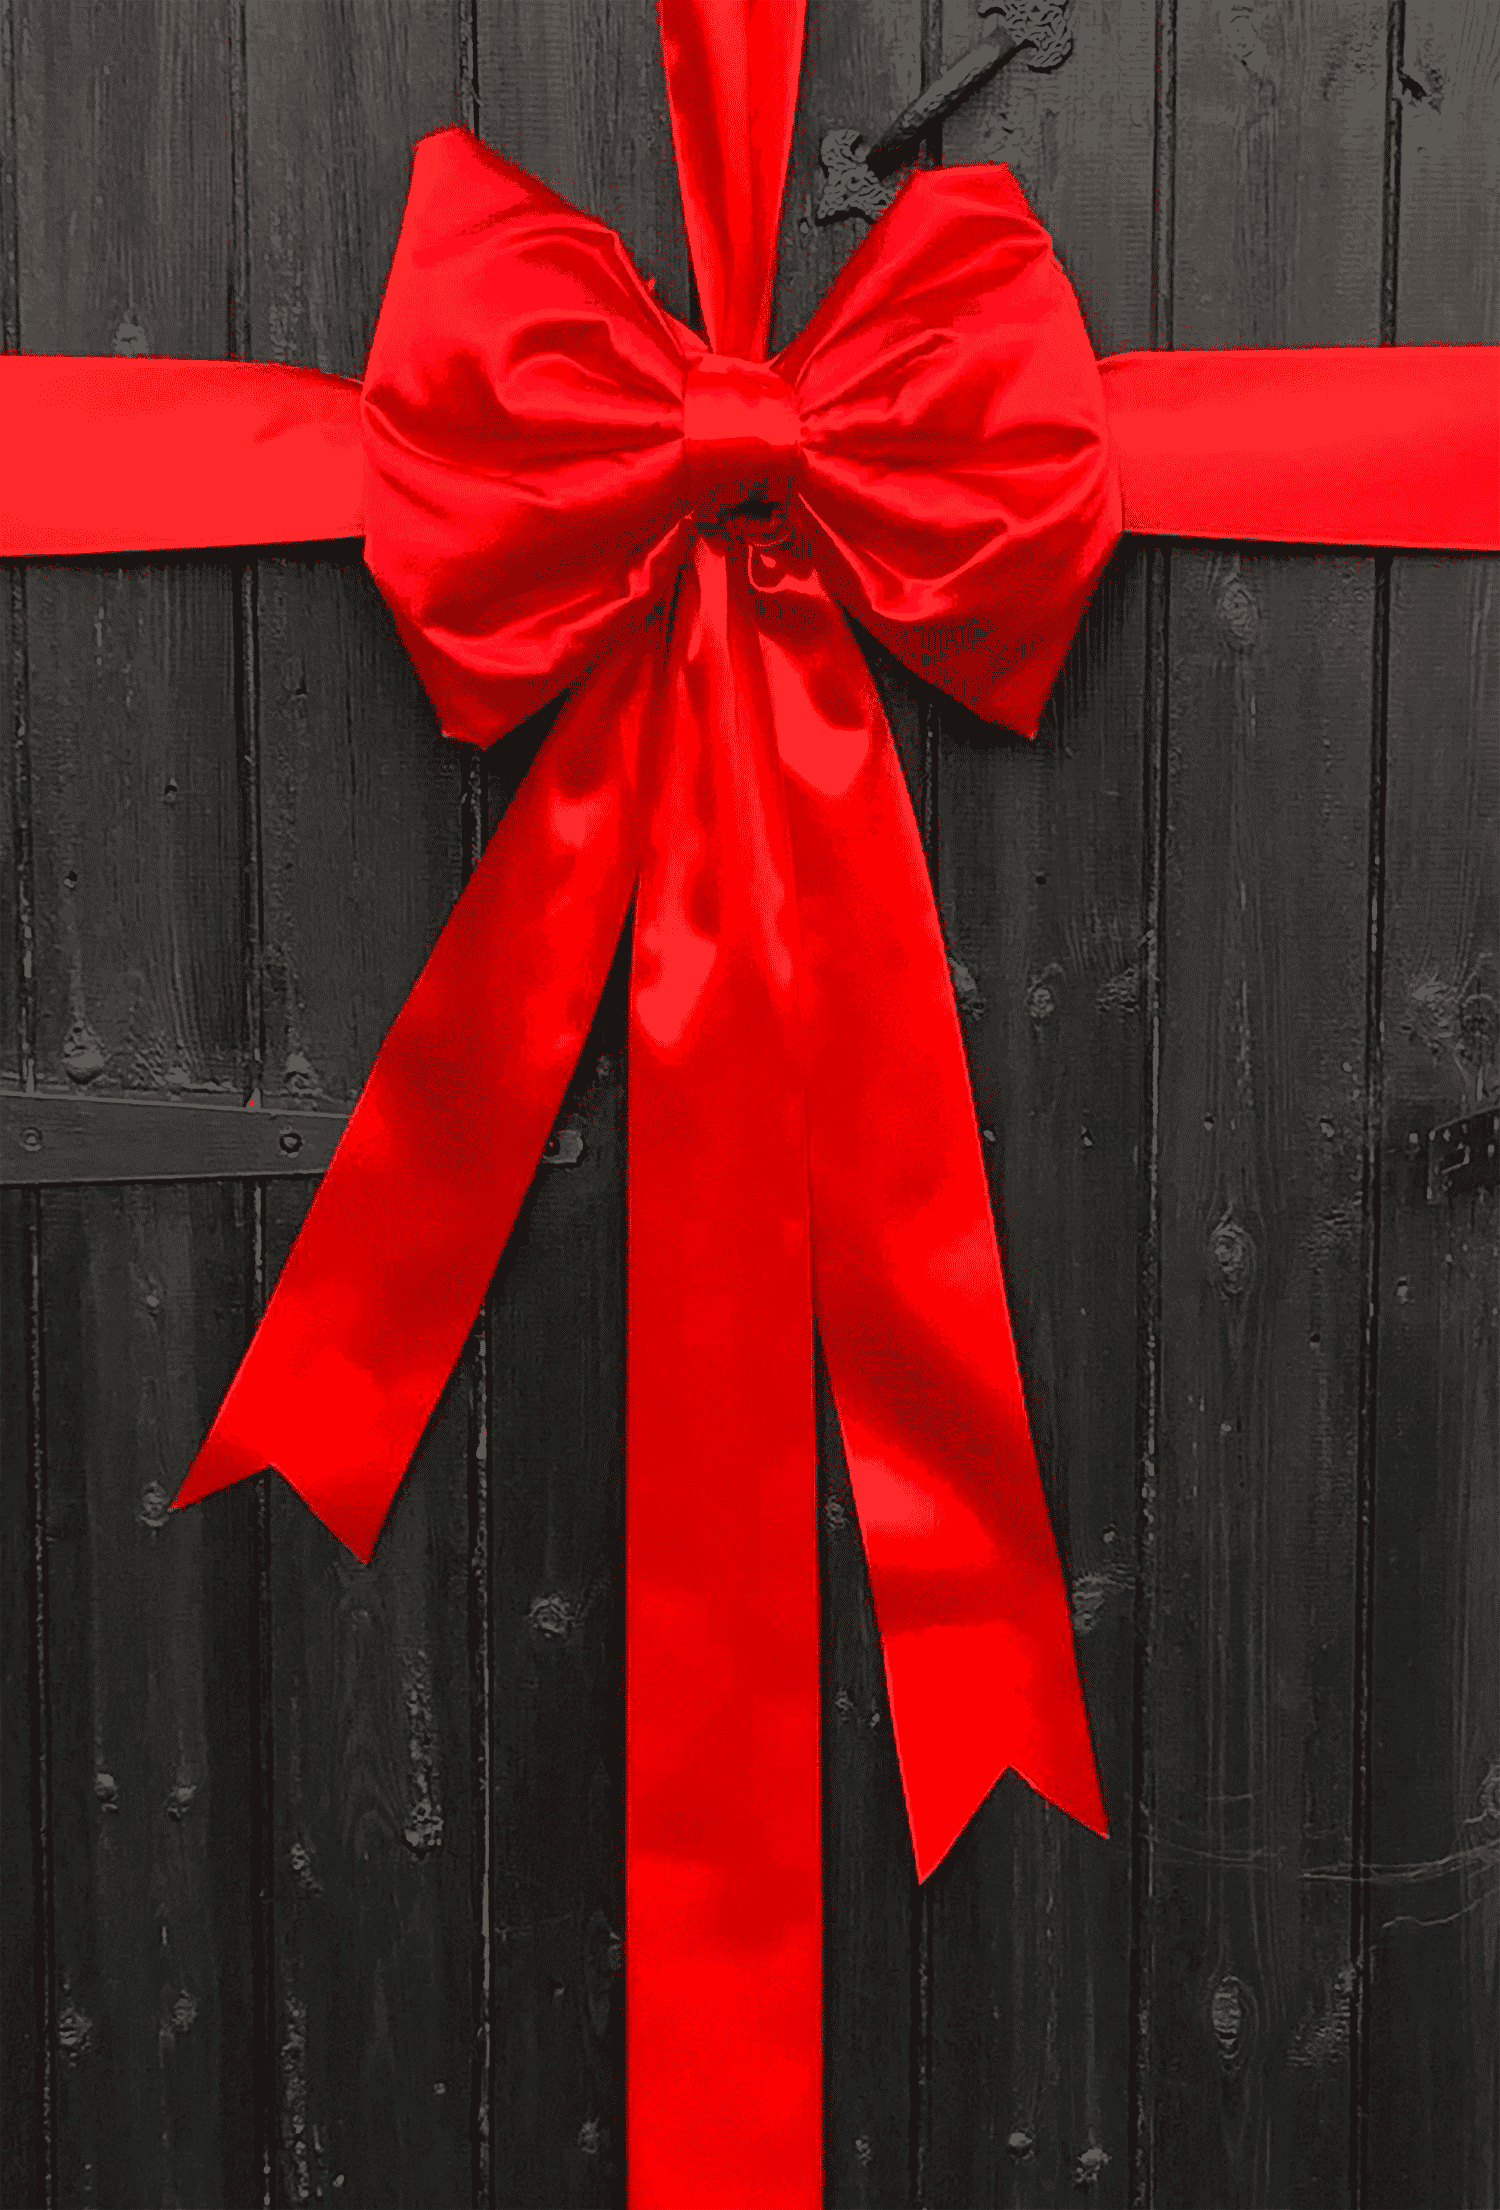 Red Padded Door Bow 2021 6